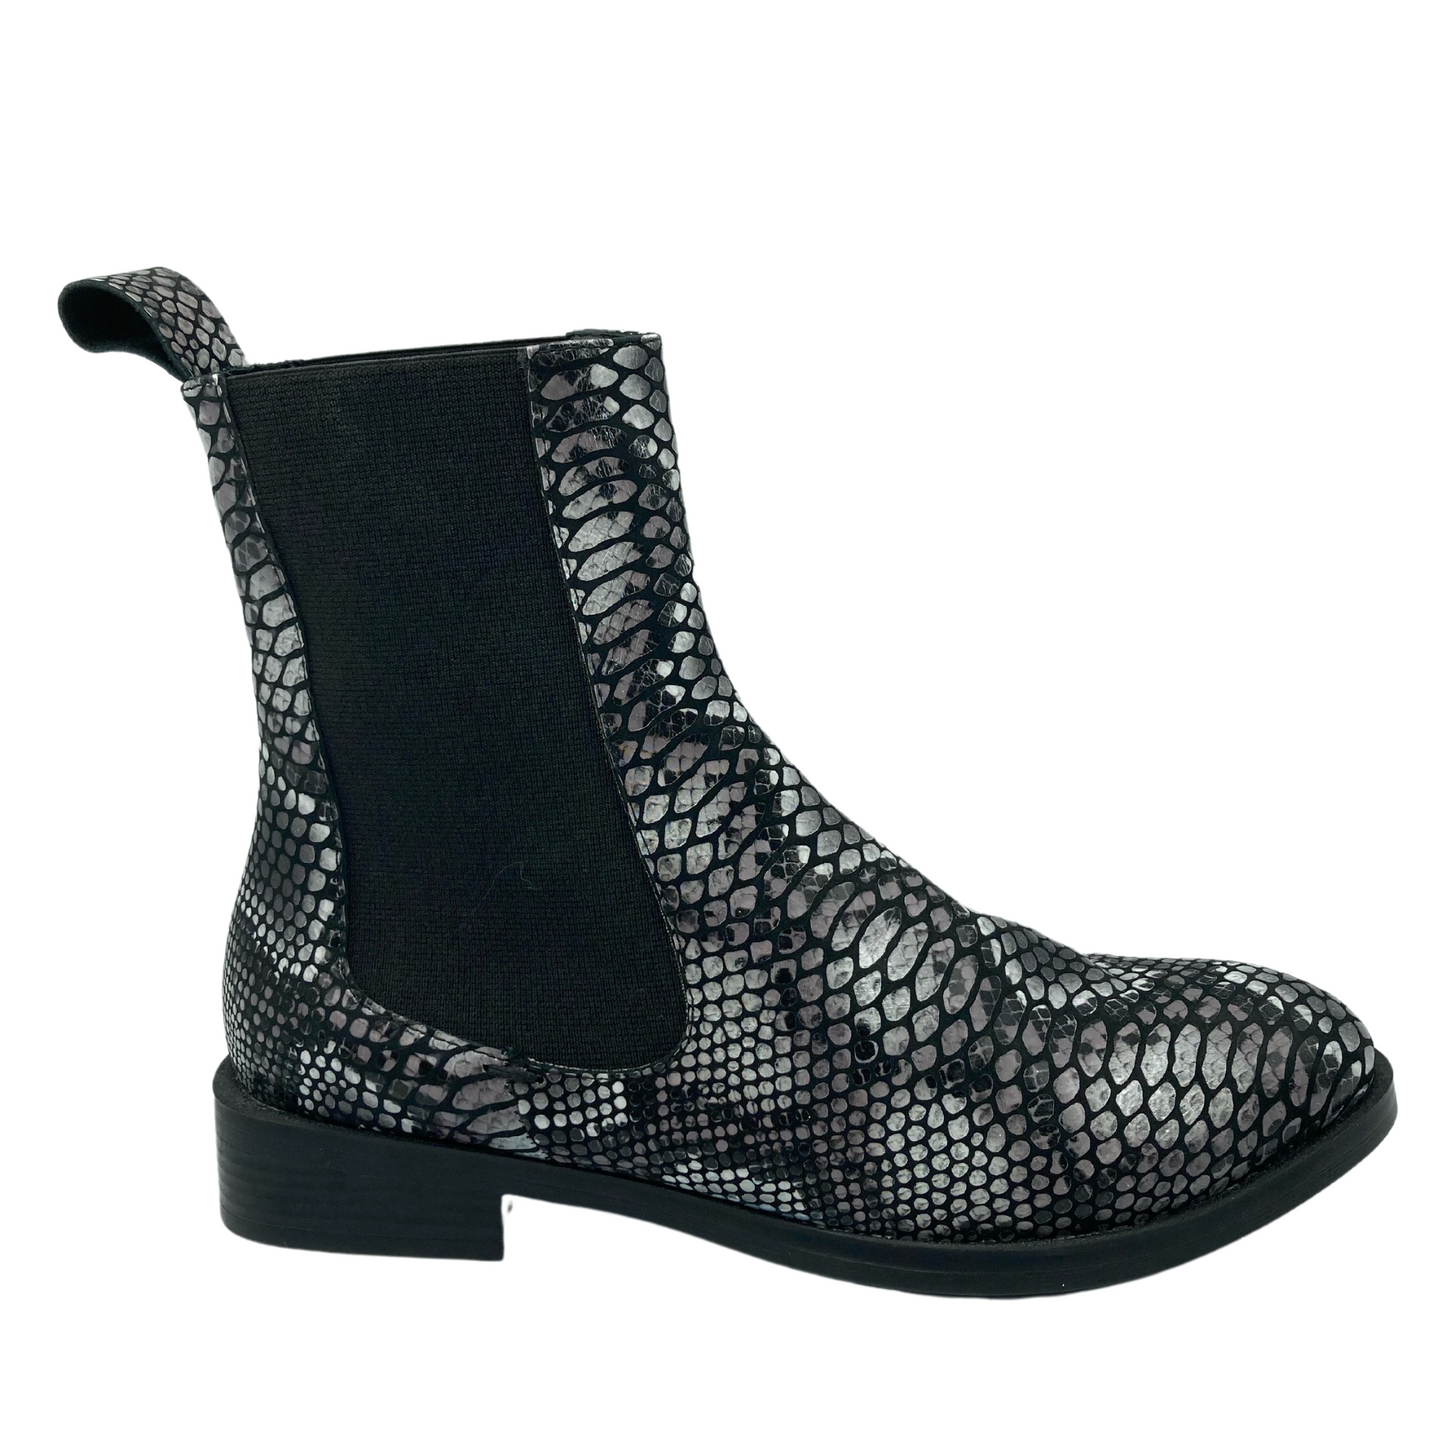 Right facing view of leather snake skin print short boot with elastic side gore